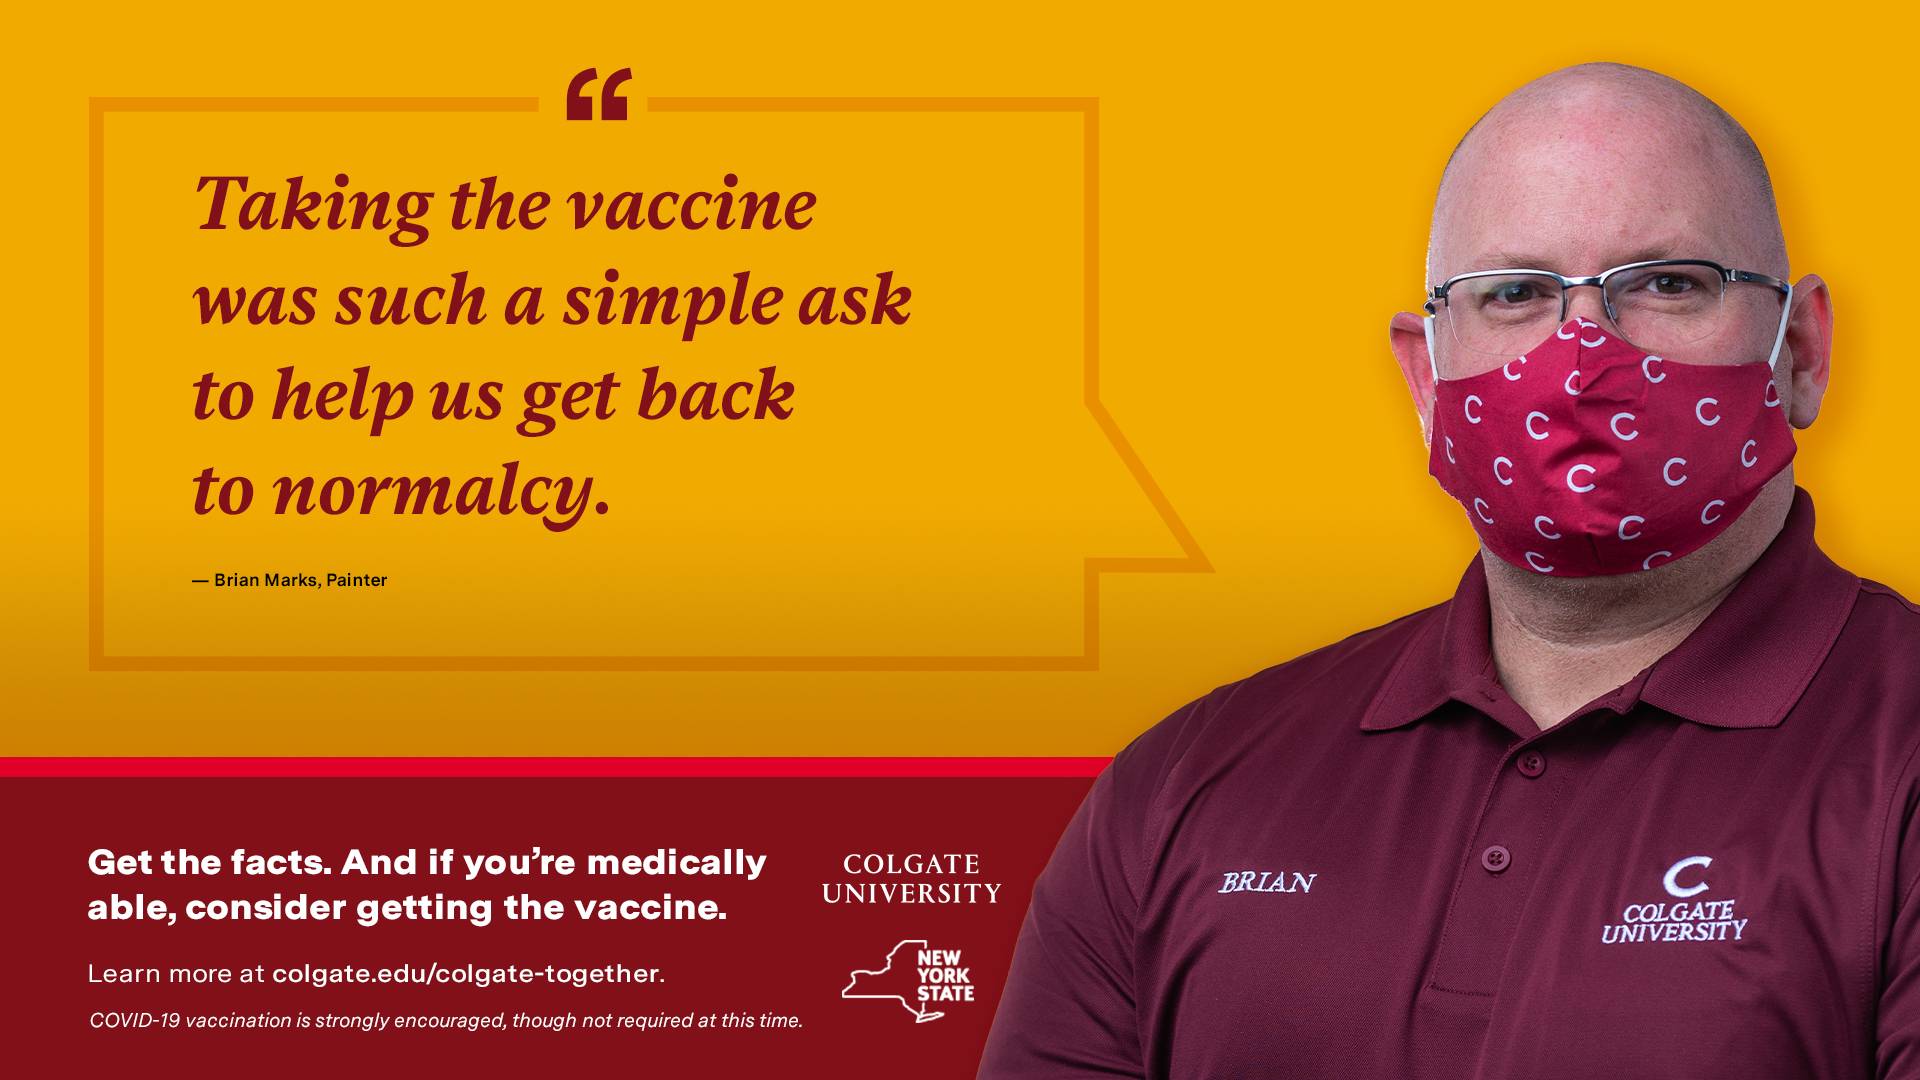 Brian Marks states his reasons for receiving the vaccine